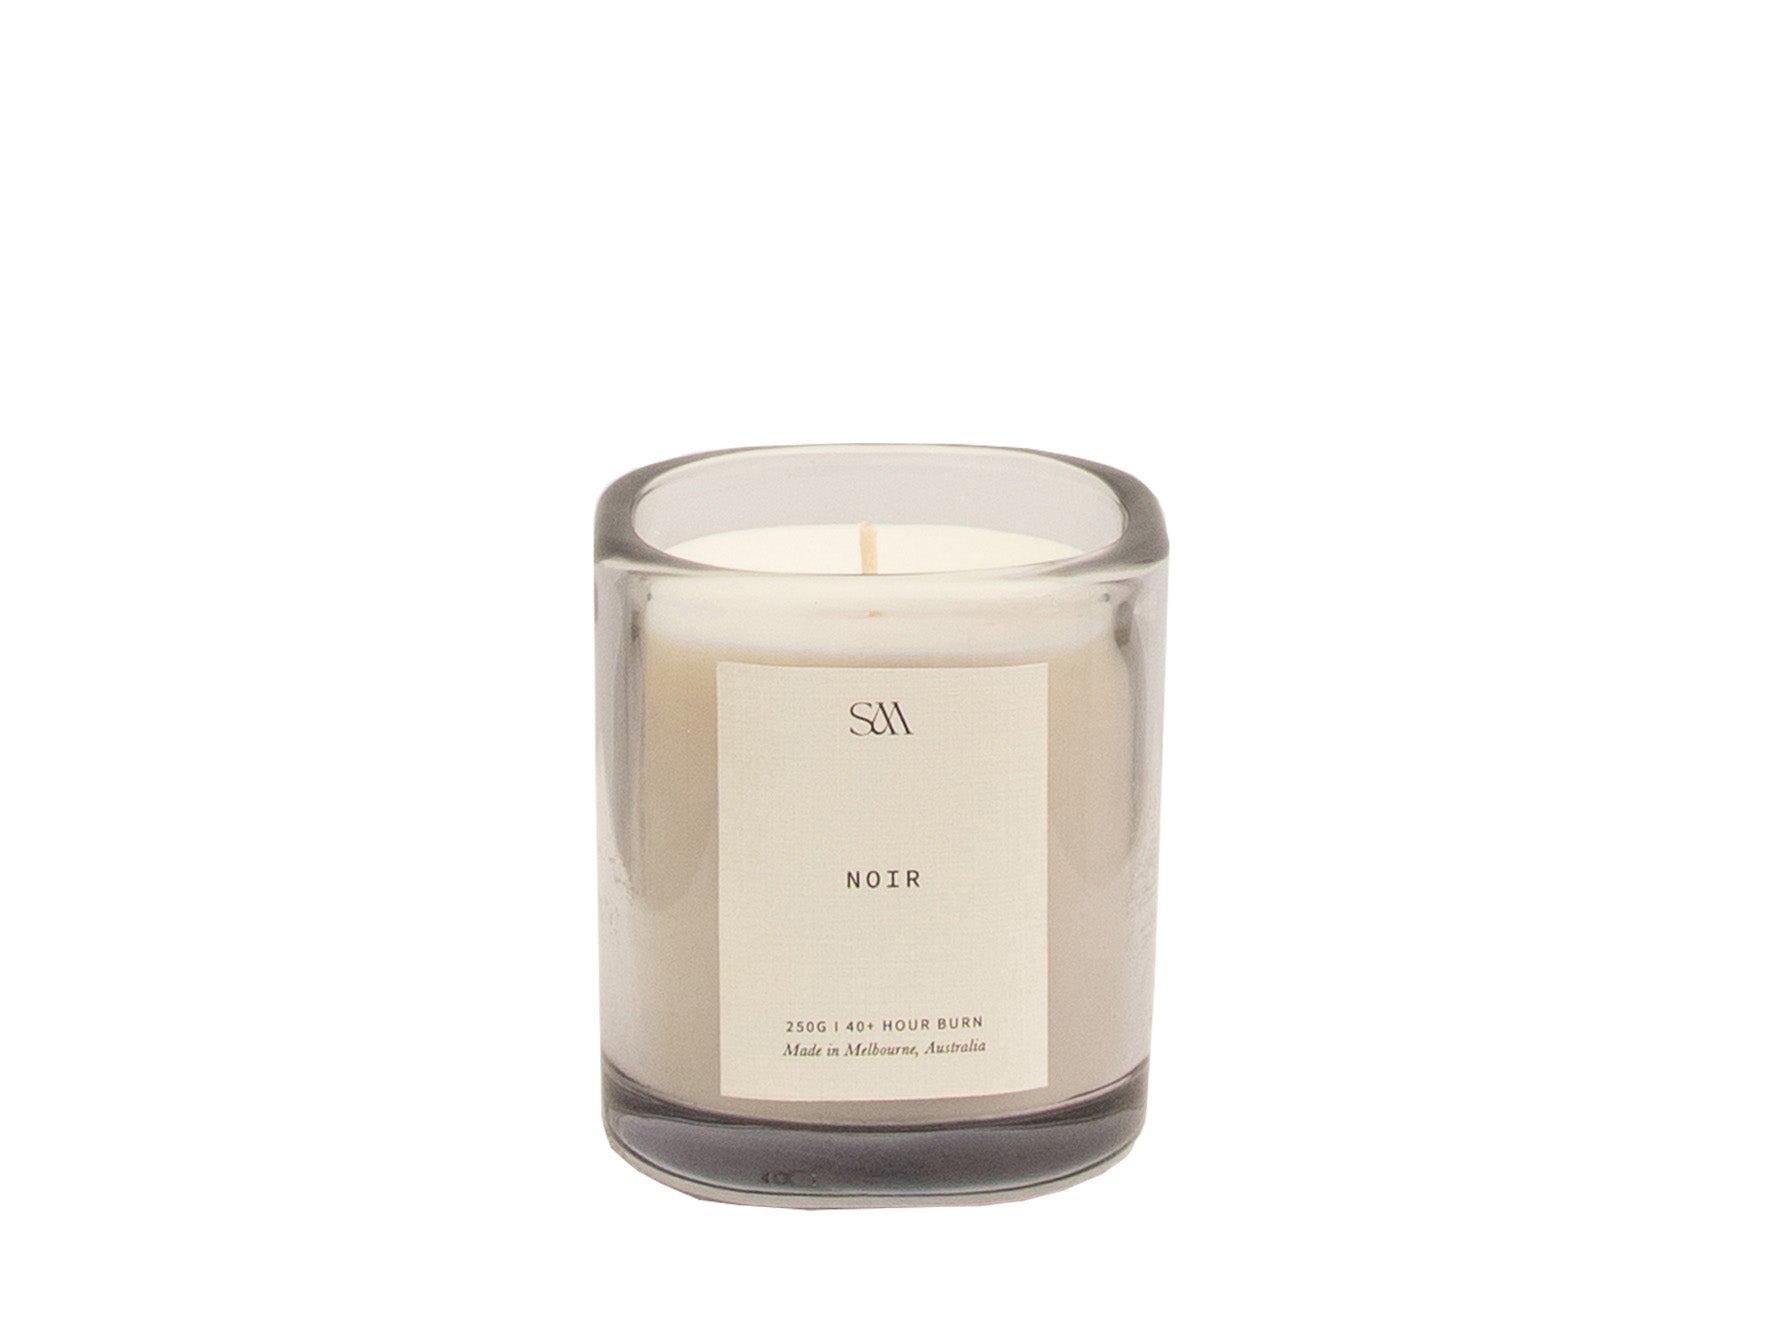 Noir 250g Signature Scented Candle